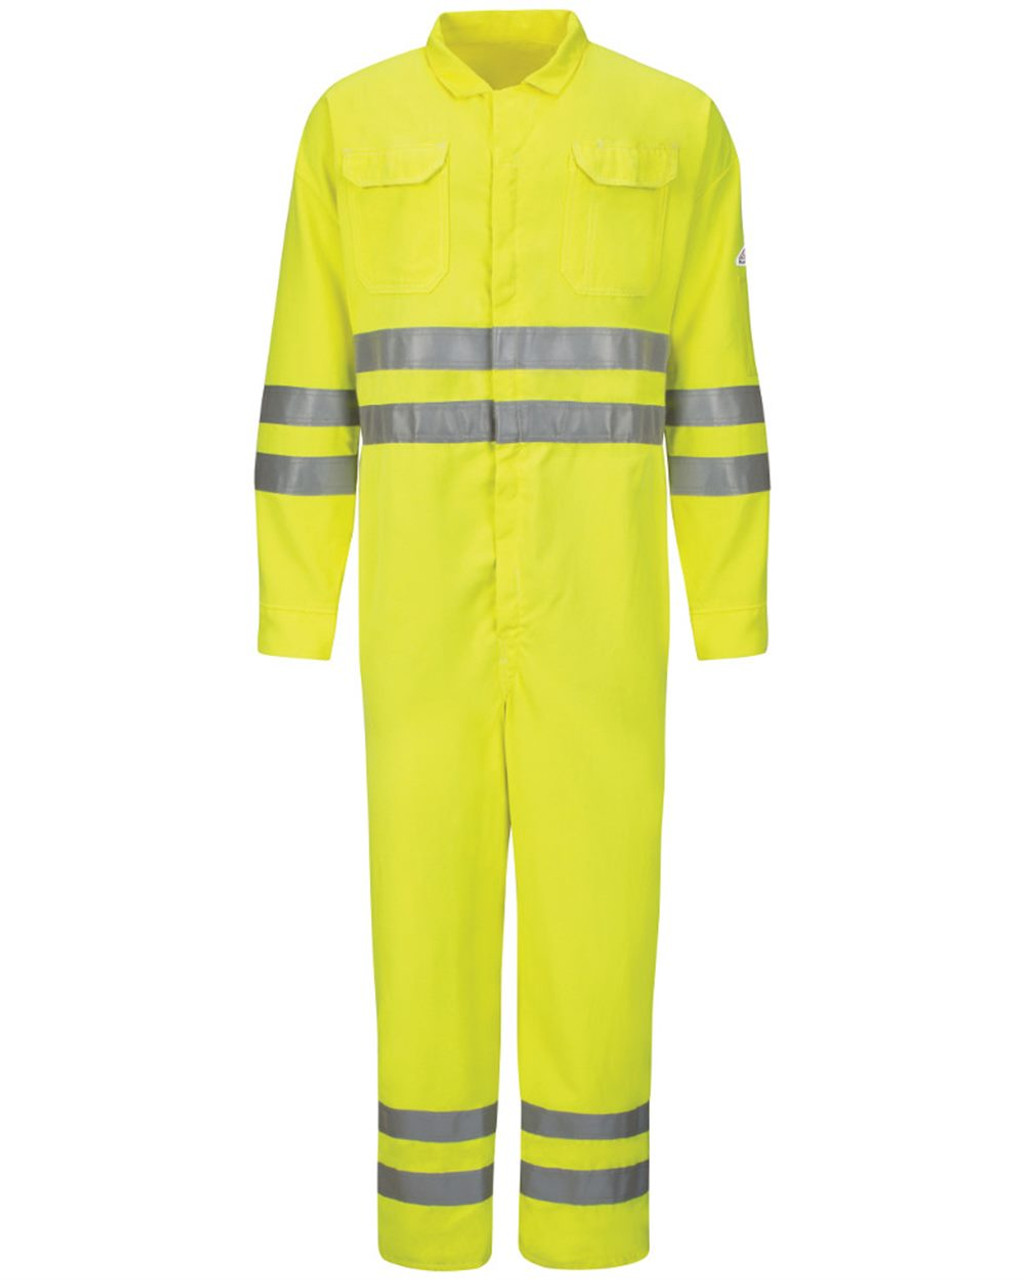 Embroidered Hi-Vis Deluxe Coverall with Reflective Trim - CoolTouch® 2 - 7 oz. - CMD8